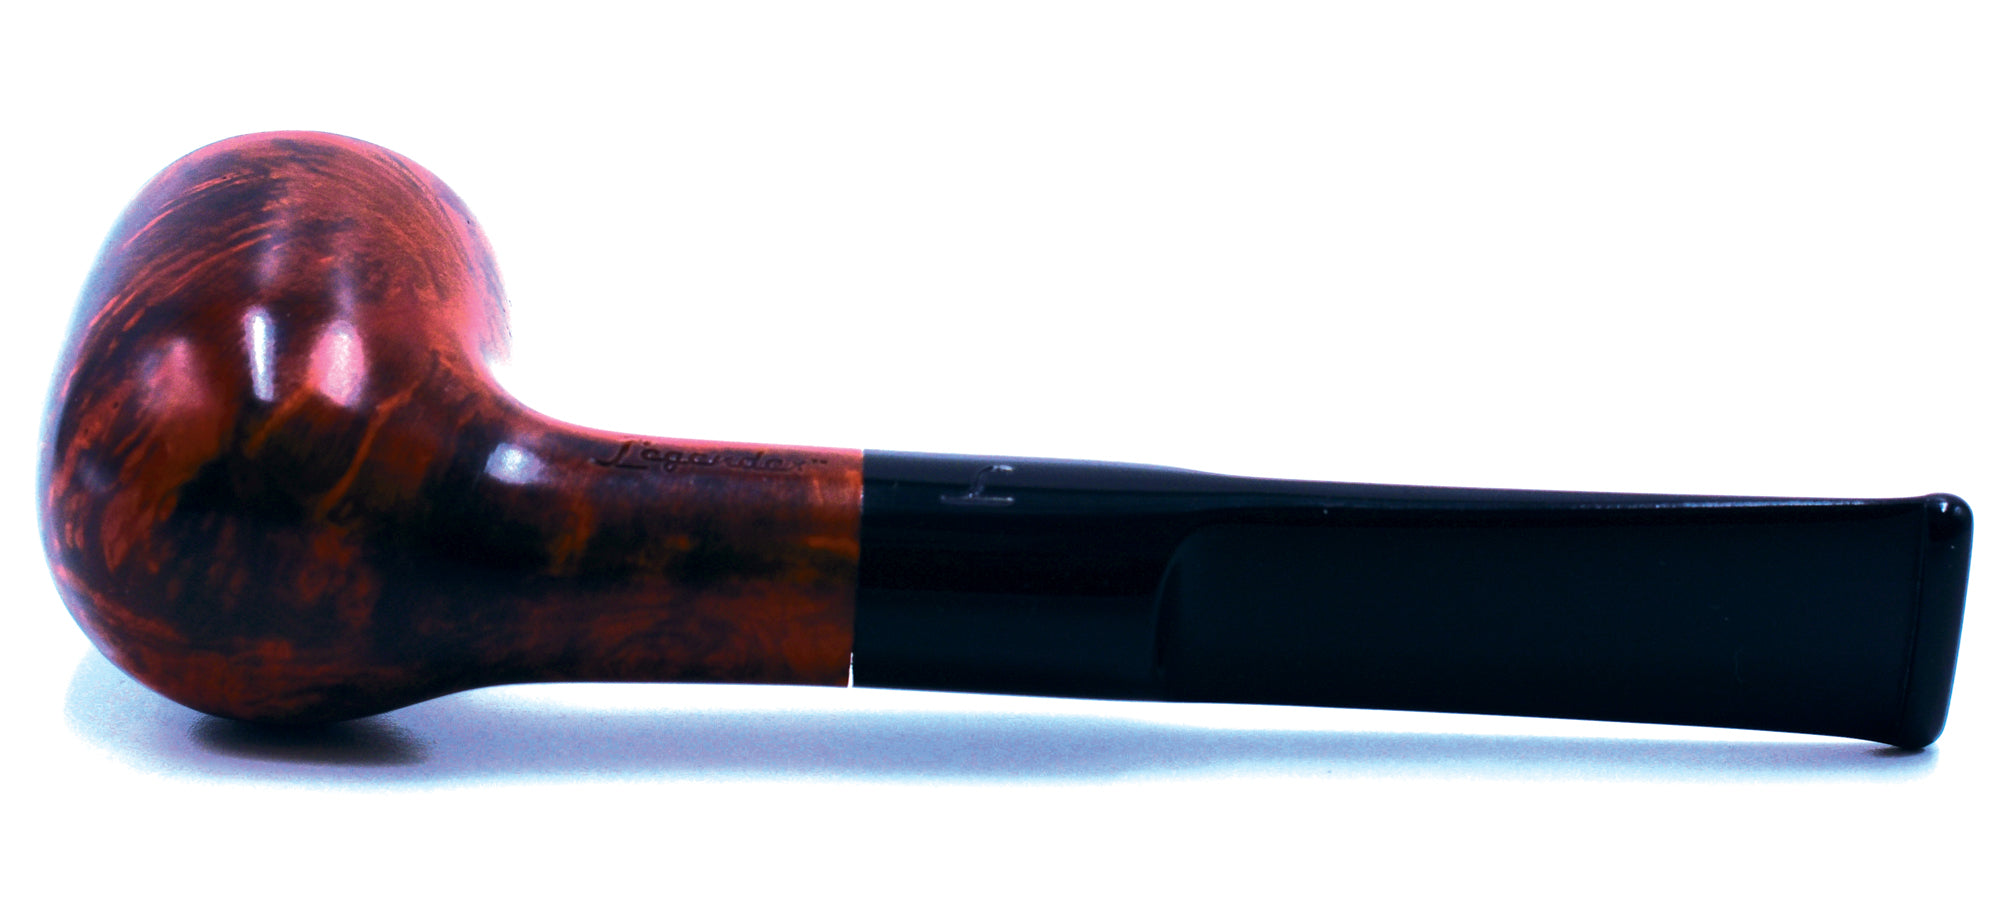 LEGENDEX® SCALADI* 9 MM Filtered Briar Smoking Pipe Made In Italy 01-08-157